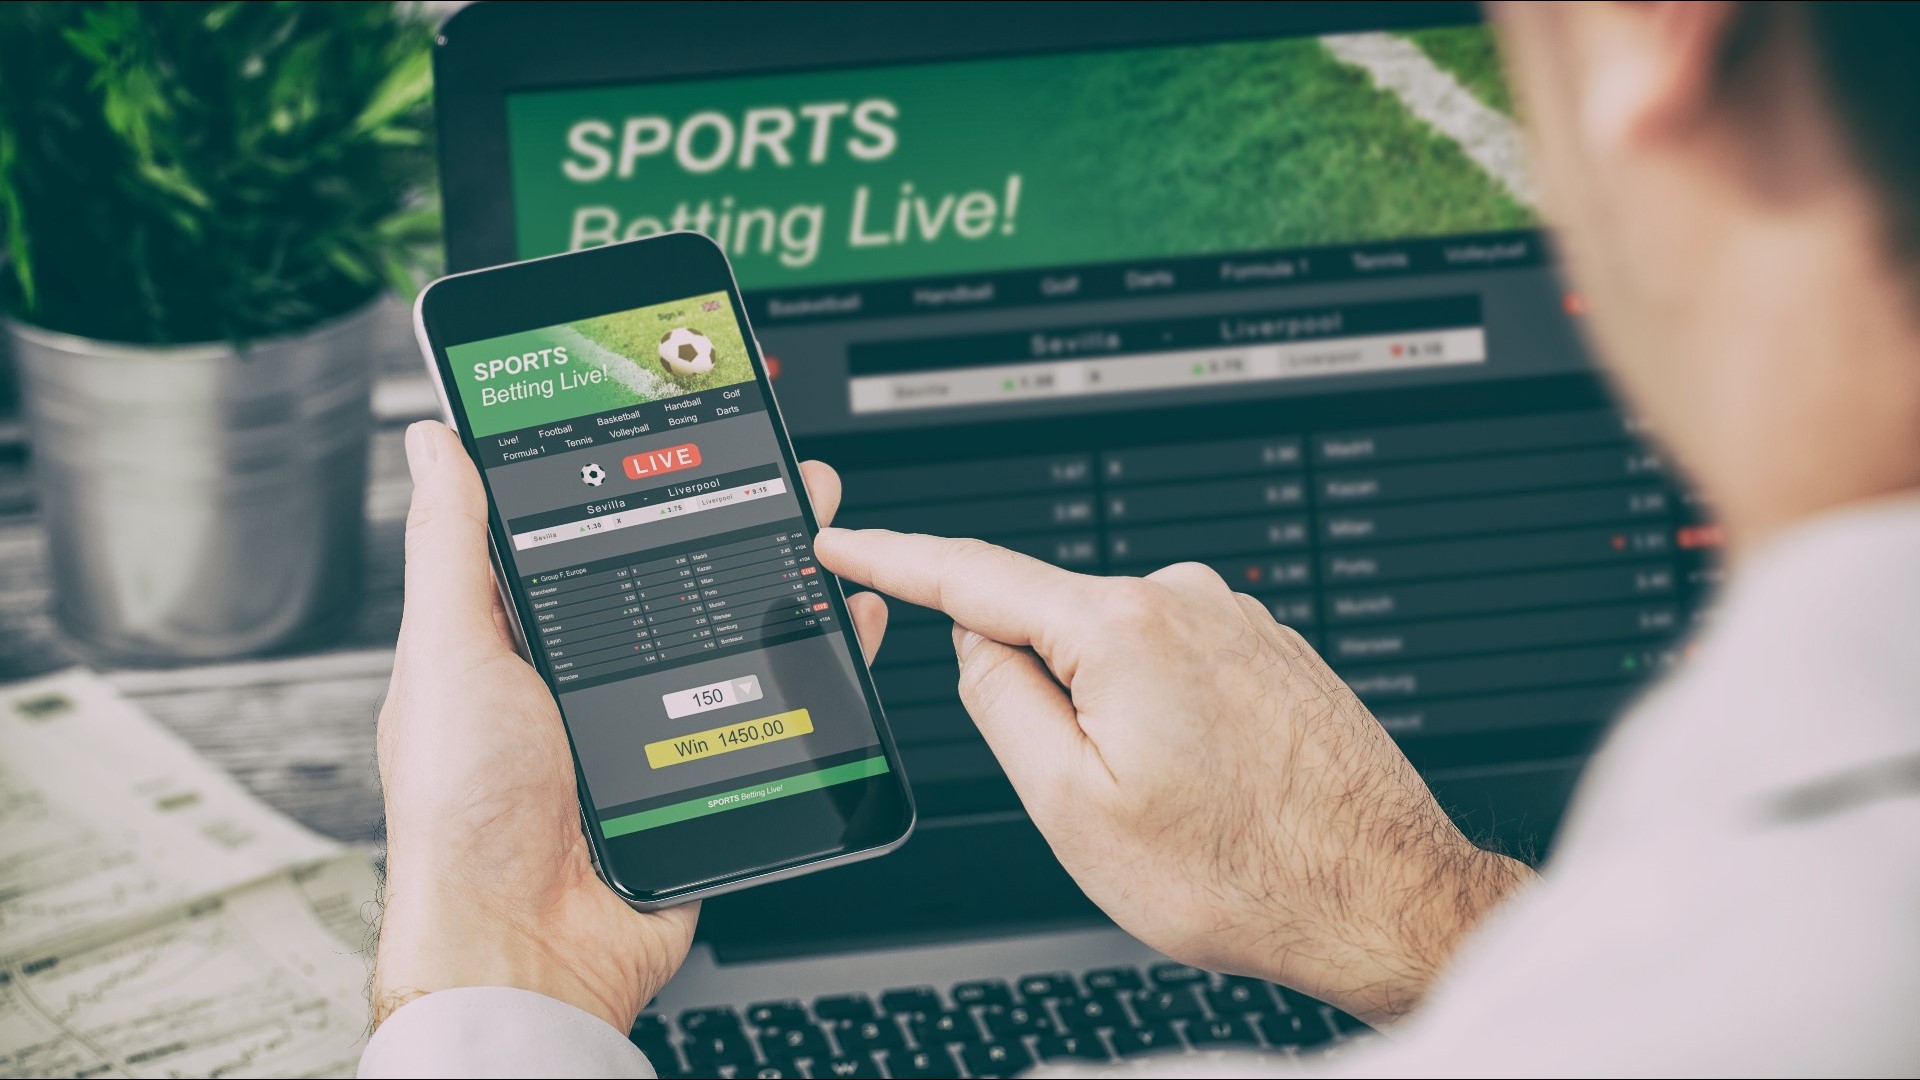 It's easier now more than ever to gamble, and initial sports betting data may not be a true representation of how sports wagering is impacting Iowans.